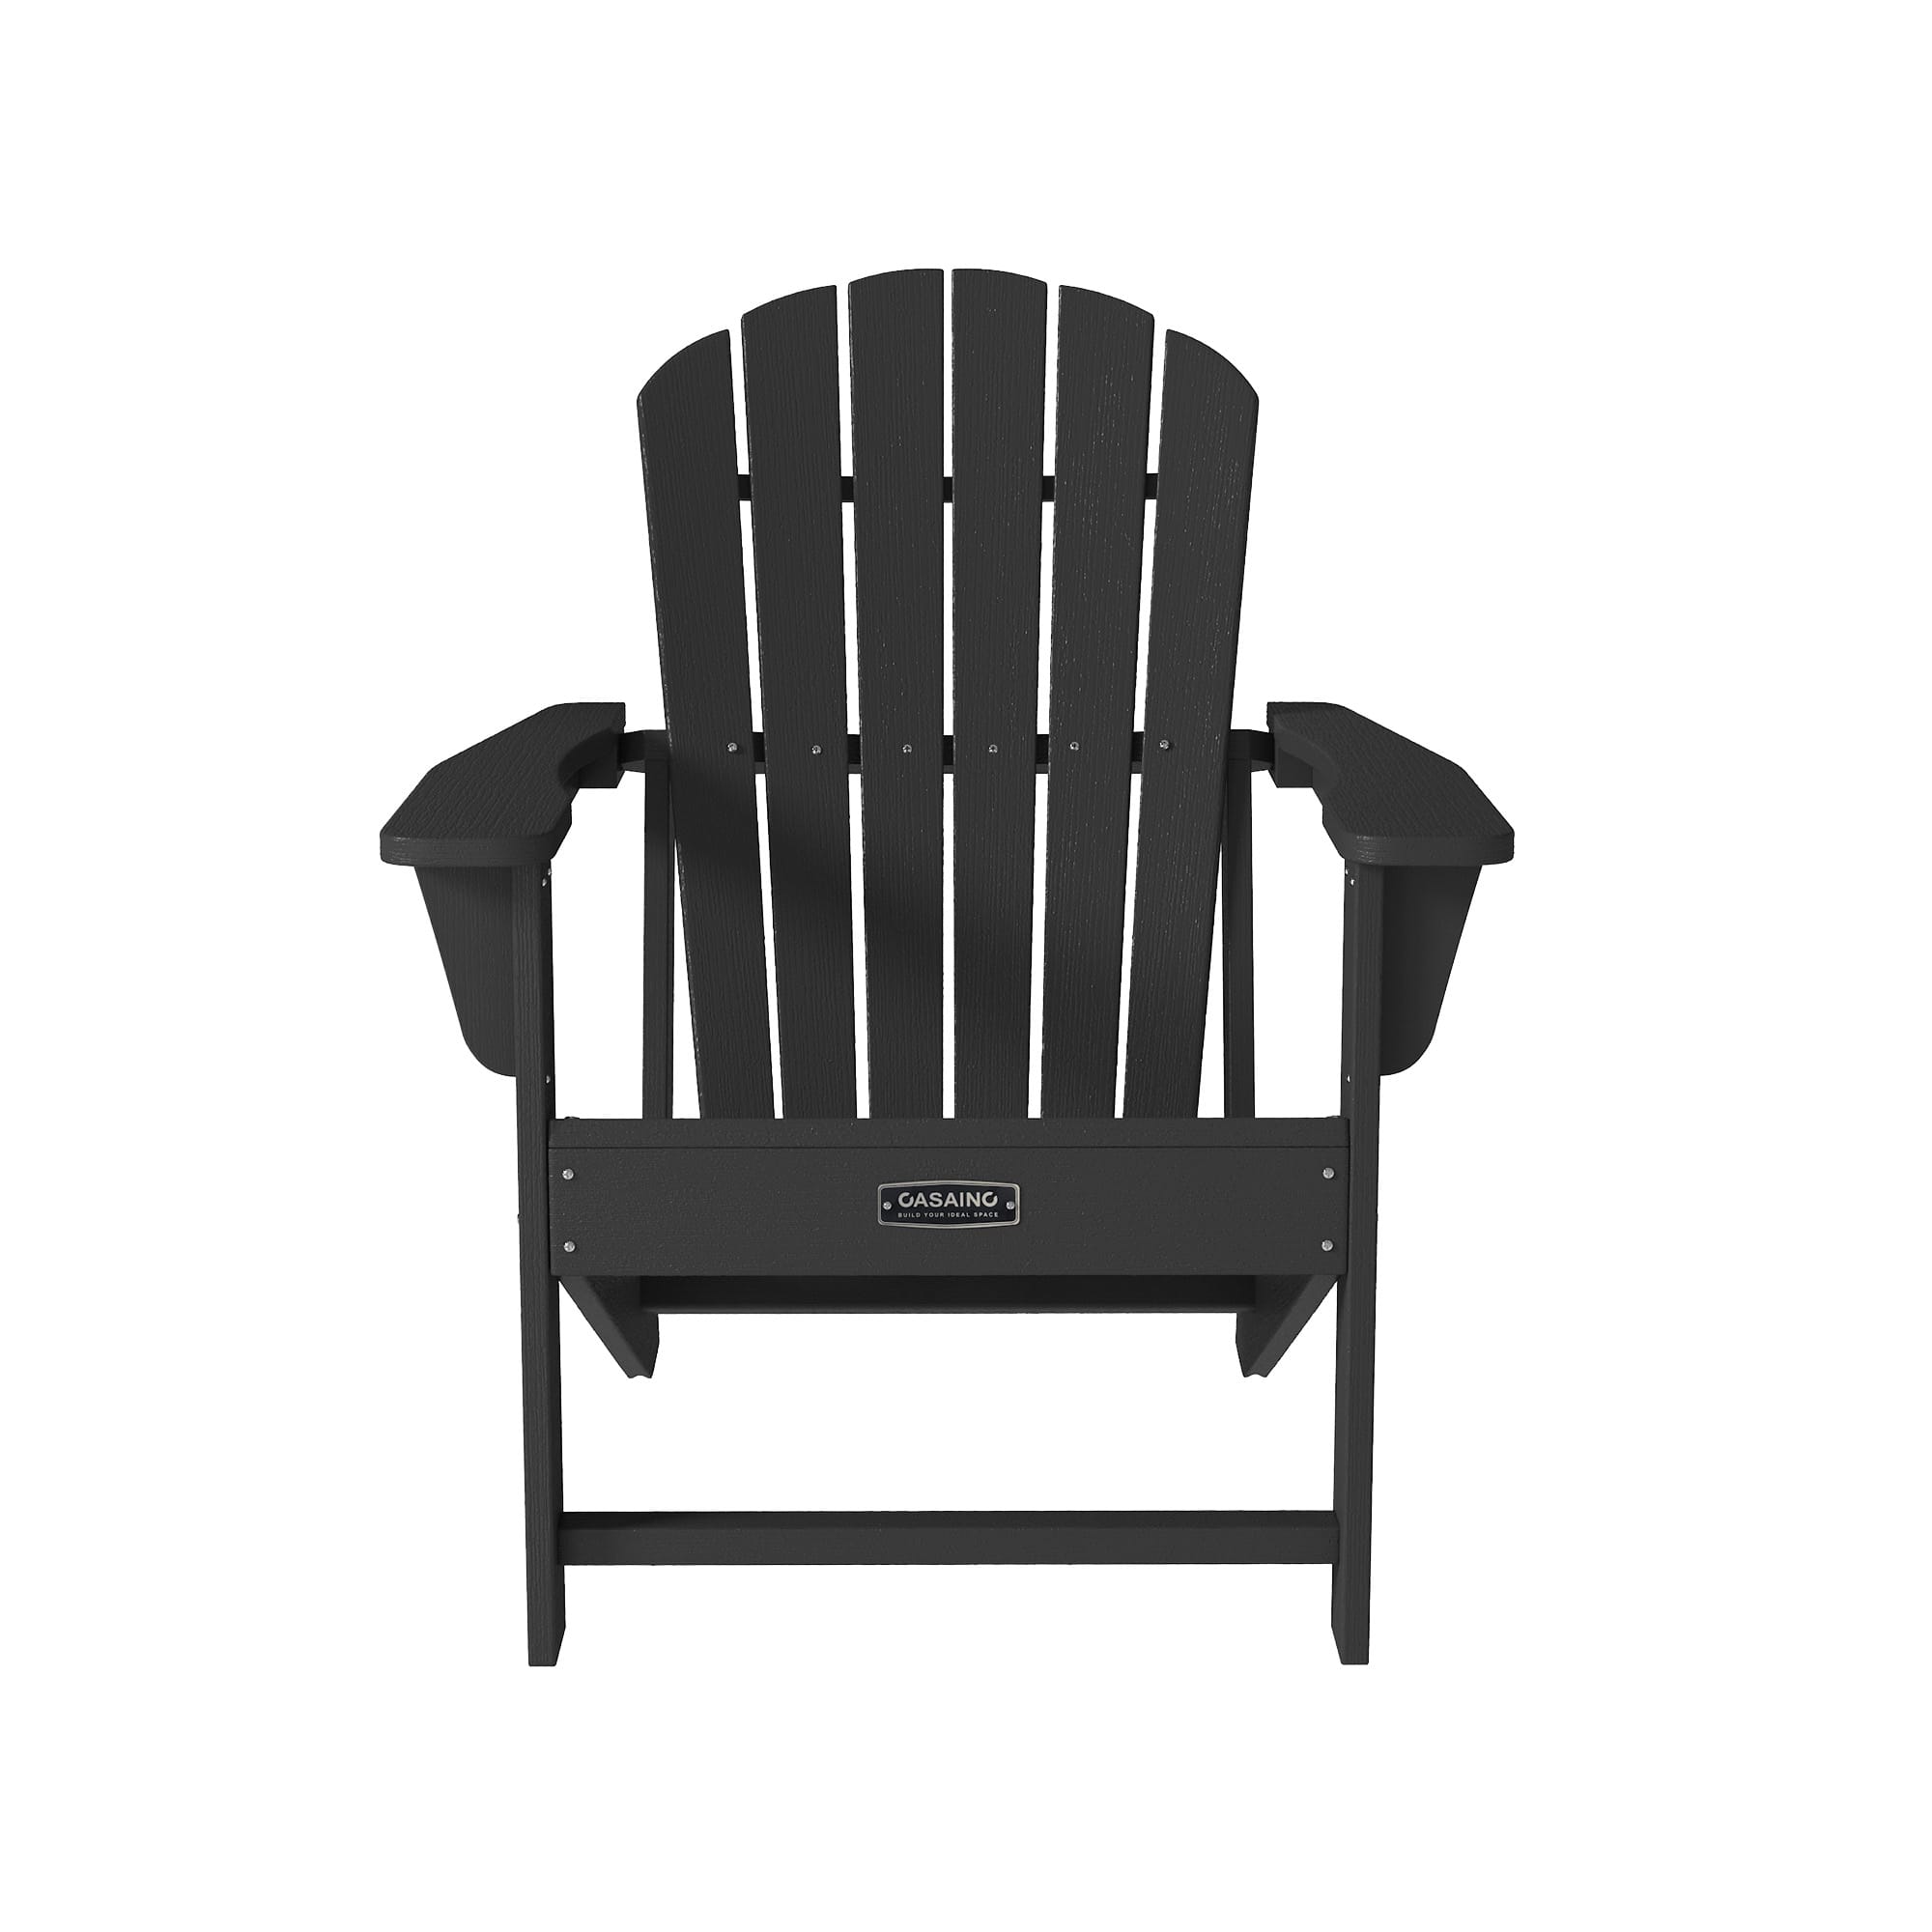 CASAINC PS Board 6 back panel fixed Outdoor Adirondack chair a variety of colors, widened armrests 4.7 inches